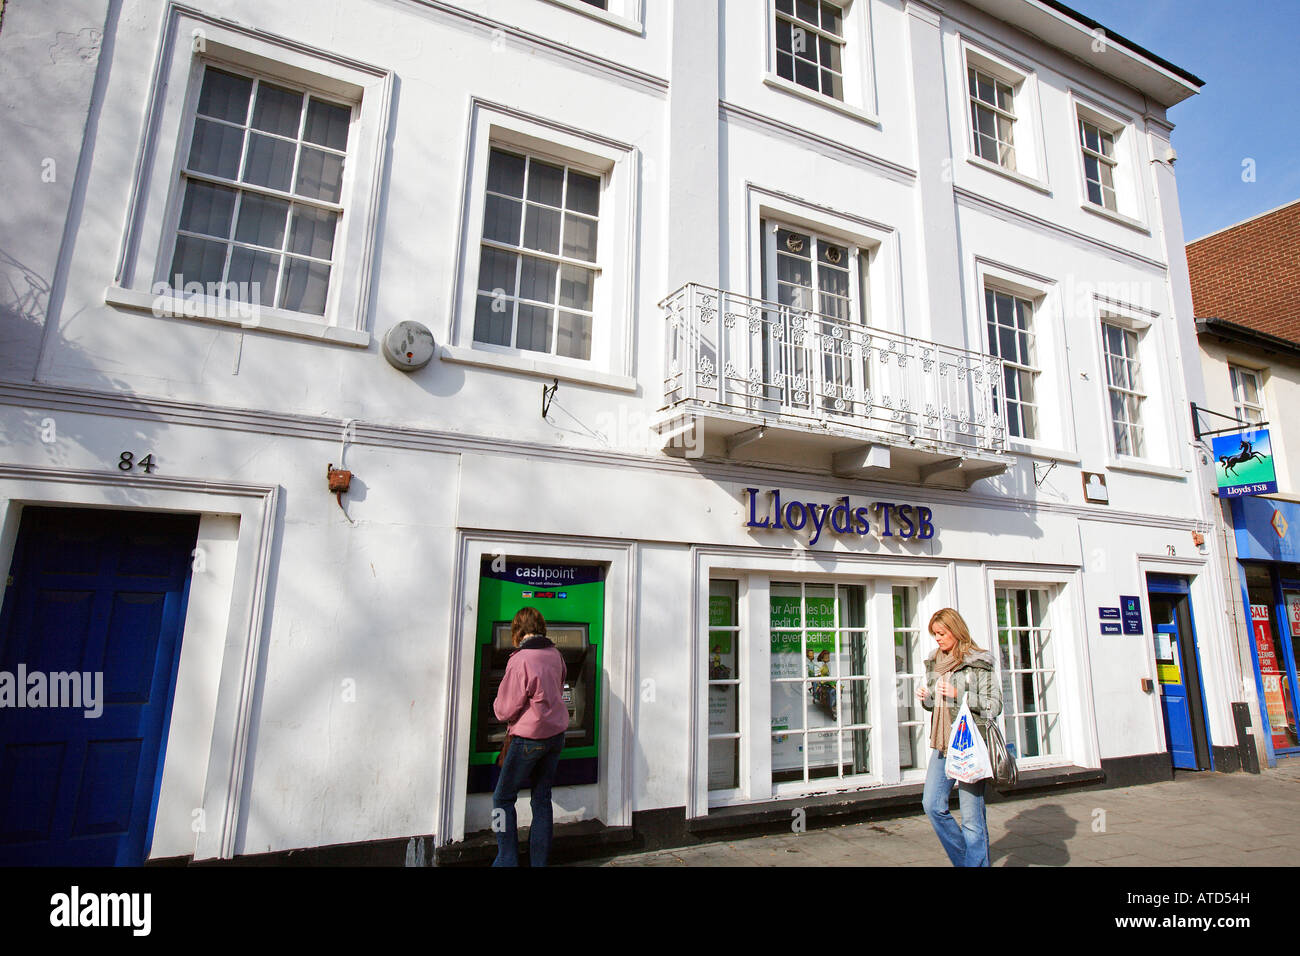 united kingdom essex rayleigh the high street and lloyds tsb bank Stock Photo